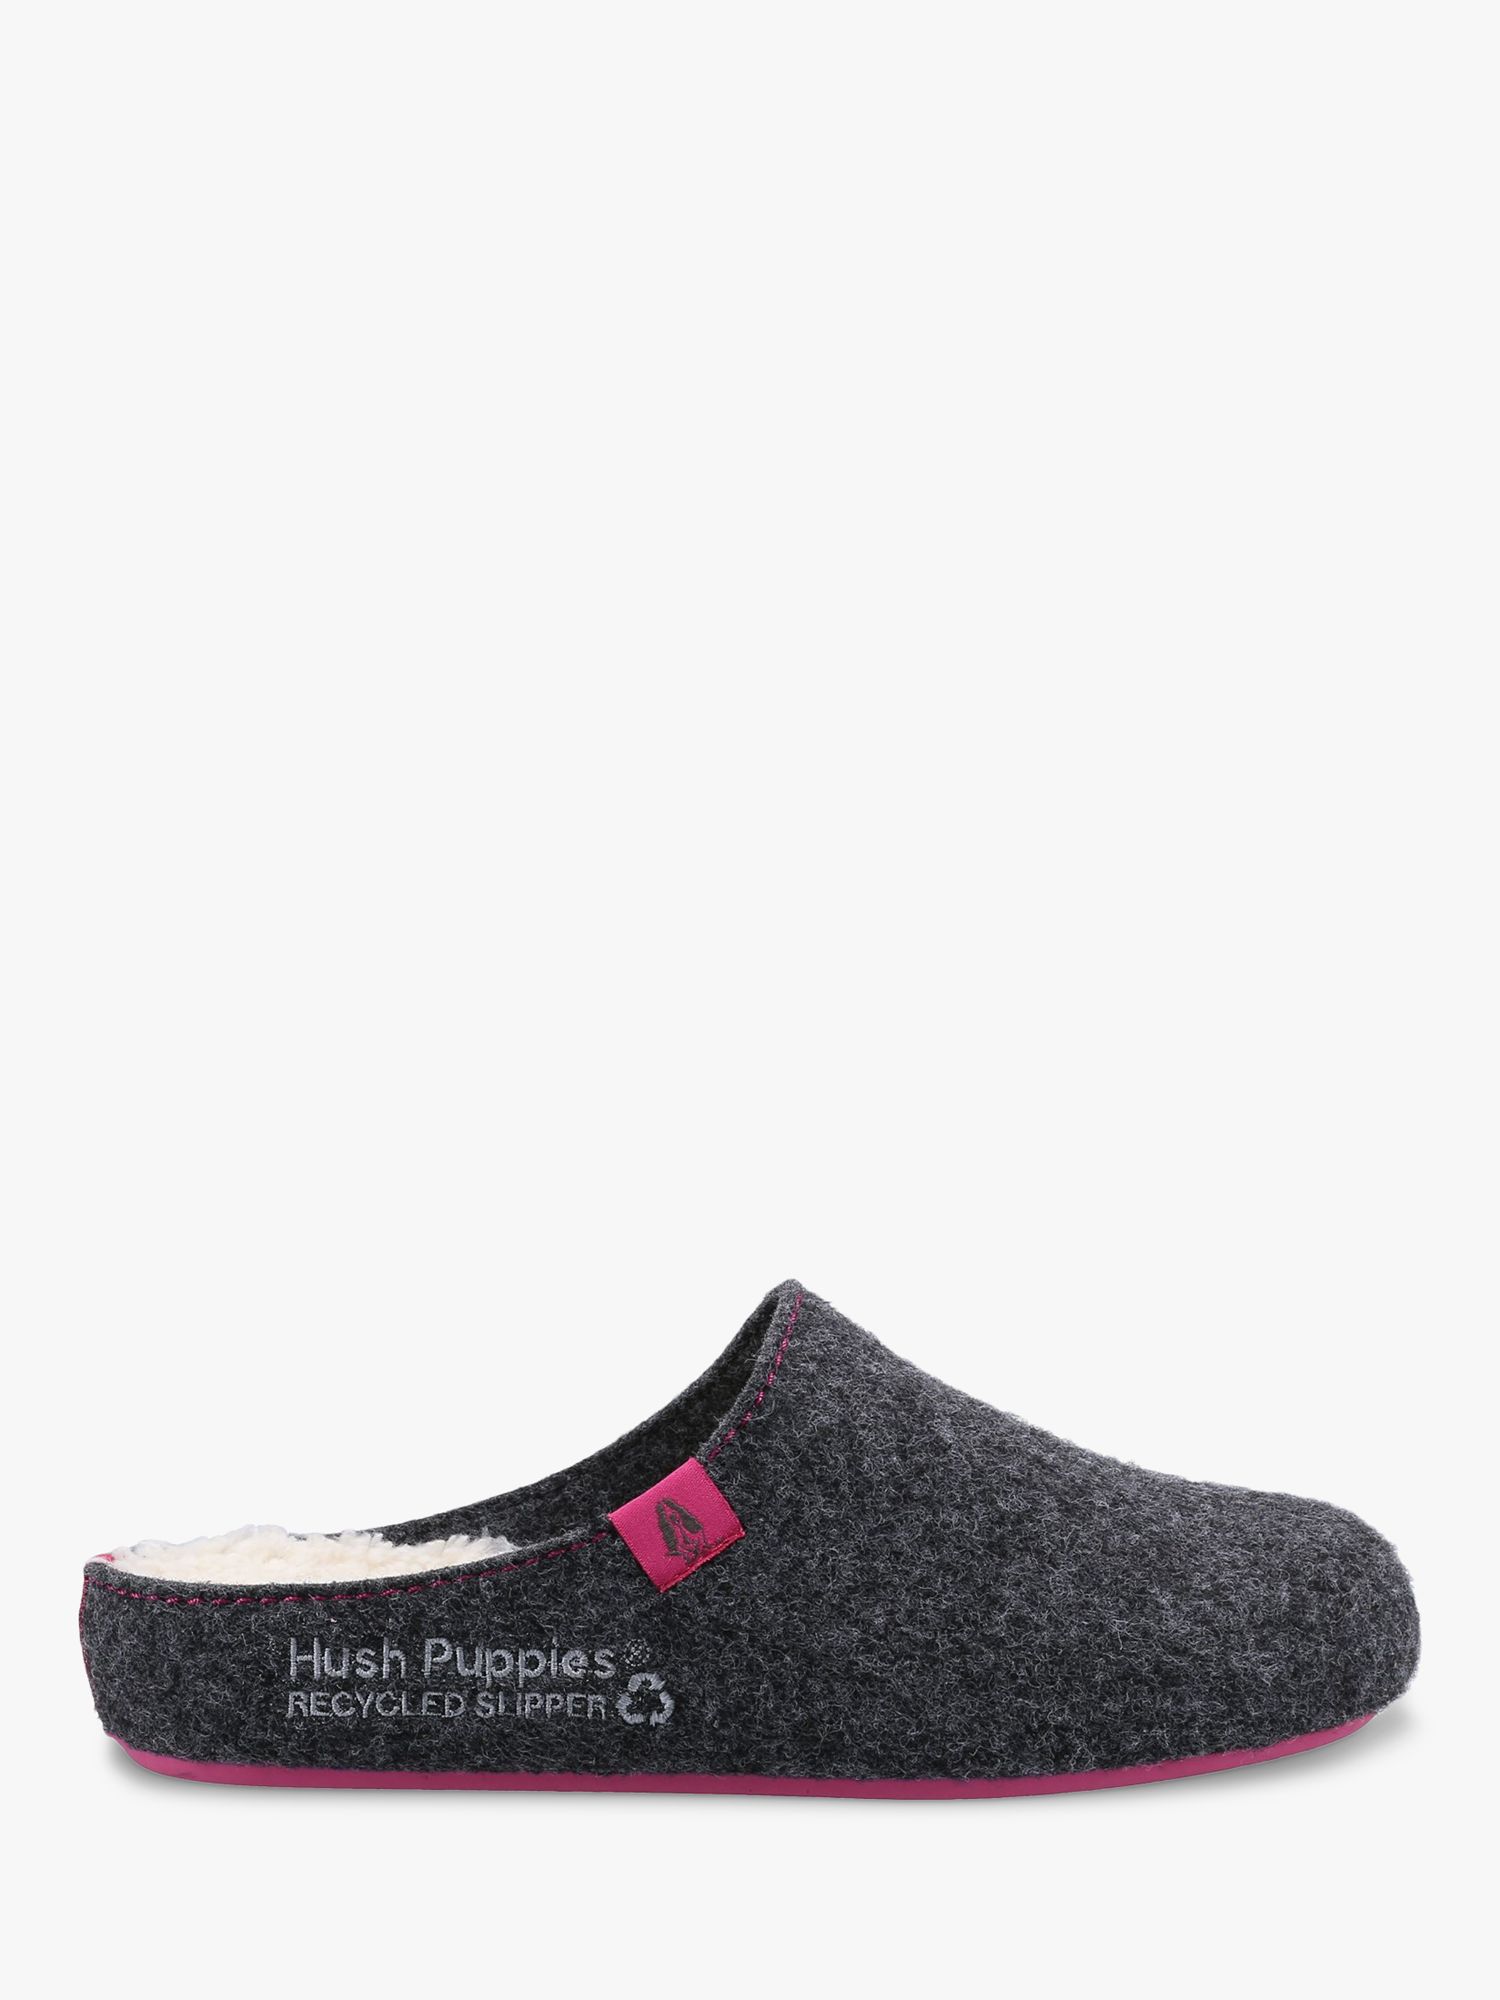 Hush Puppies The Good Mule Slippers, Charcoal, 3